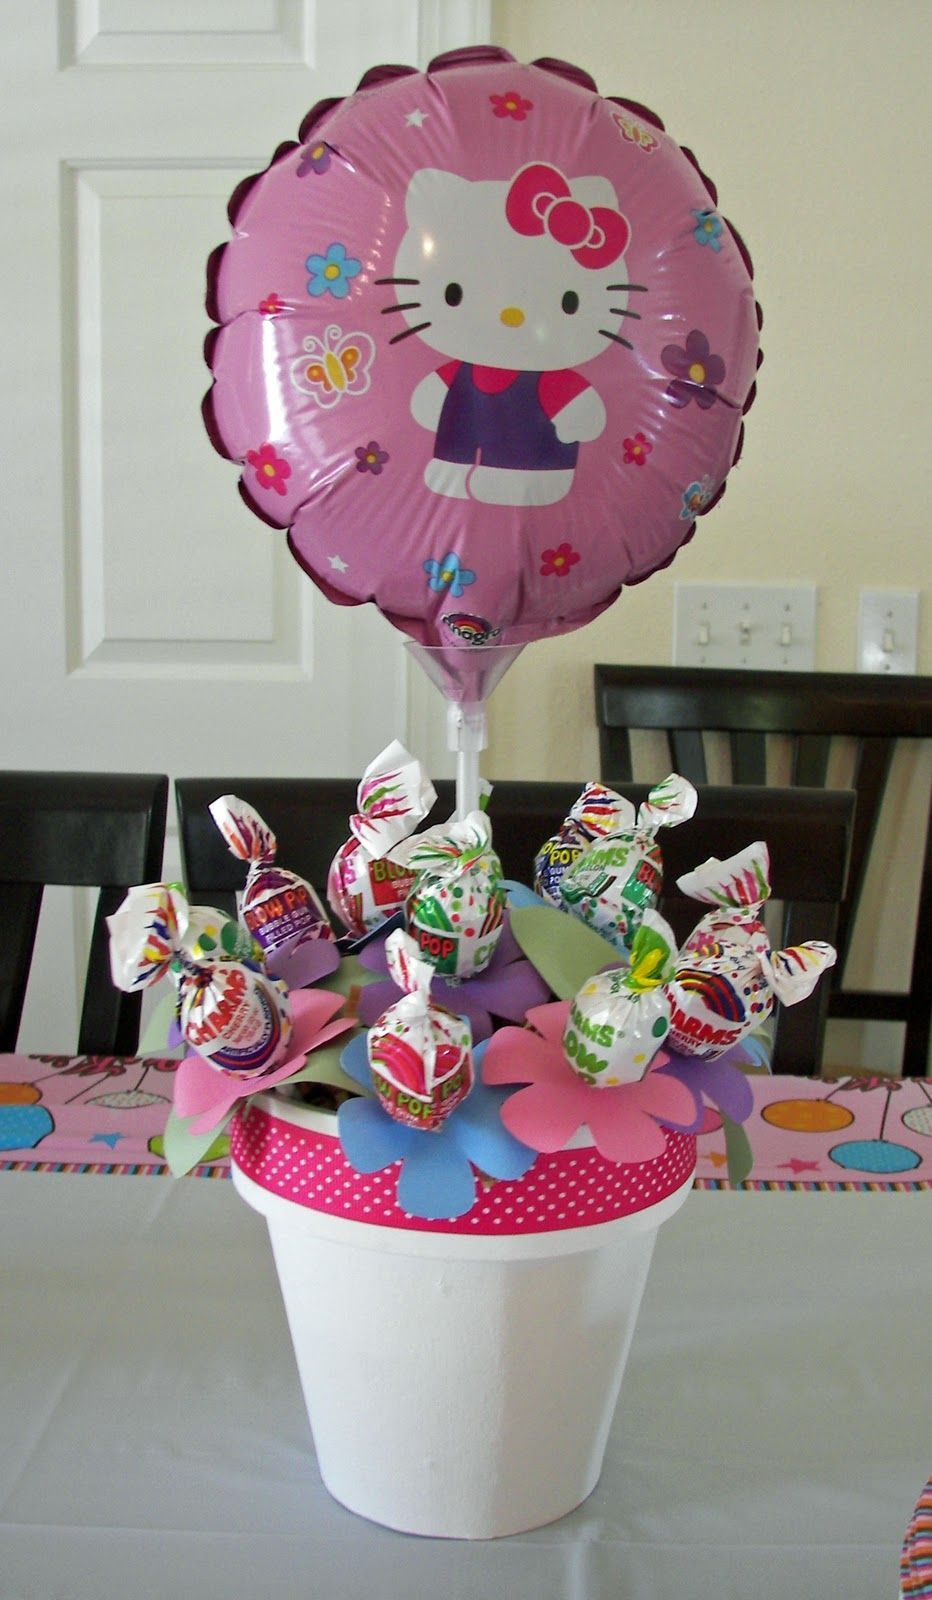 Lollipop centerpiece — Cute idea and you can do with whatever the theme is.